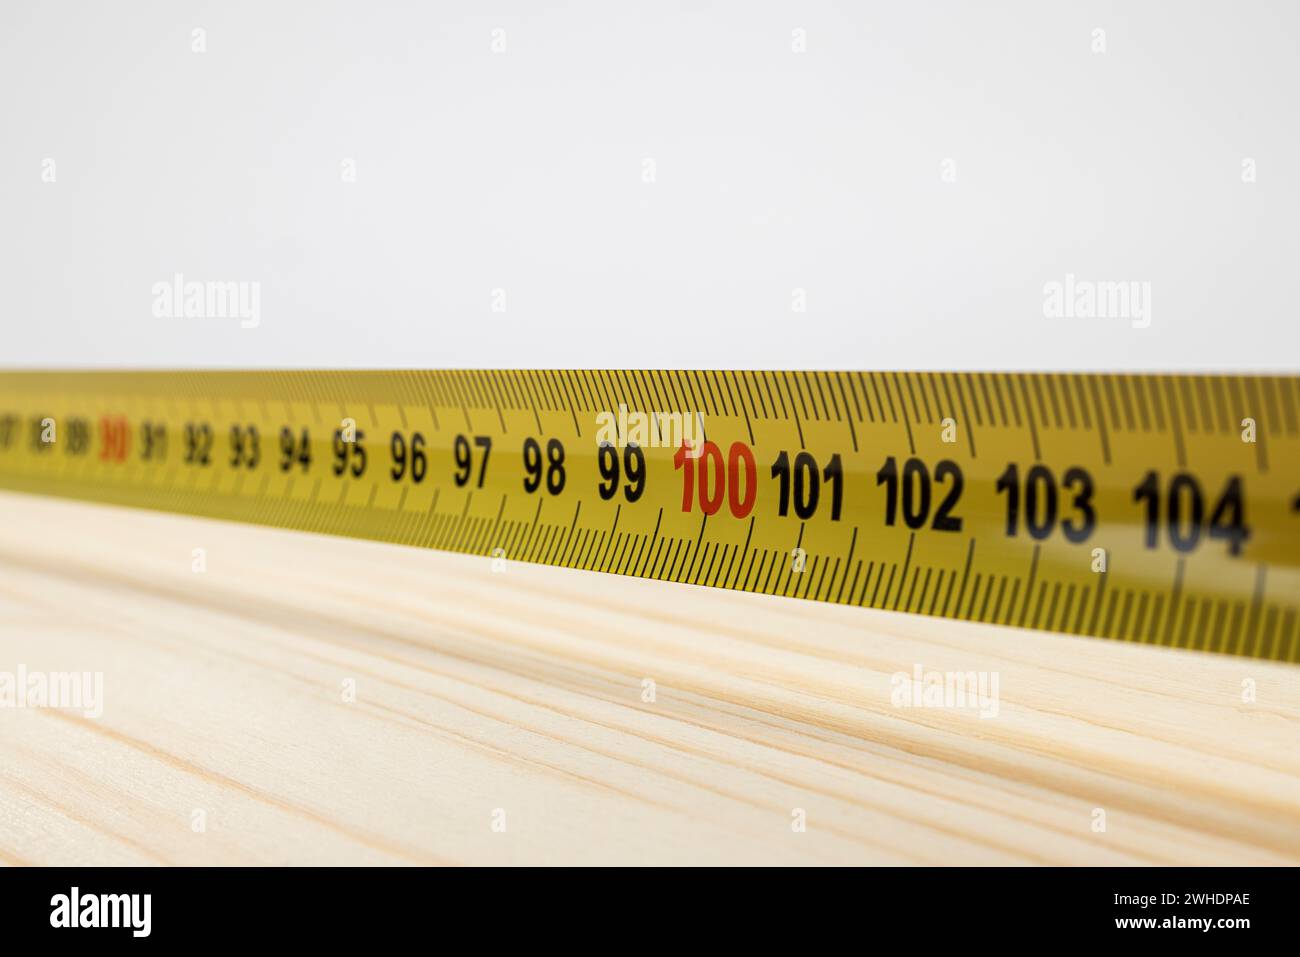 Glued wood panel measure to 100 cm, detail, blur, yellow measuring tape with millimeter and centimeter graduation, Stock Photo